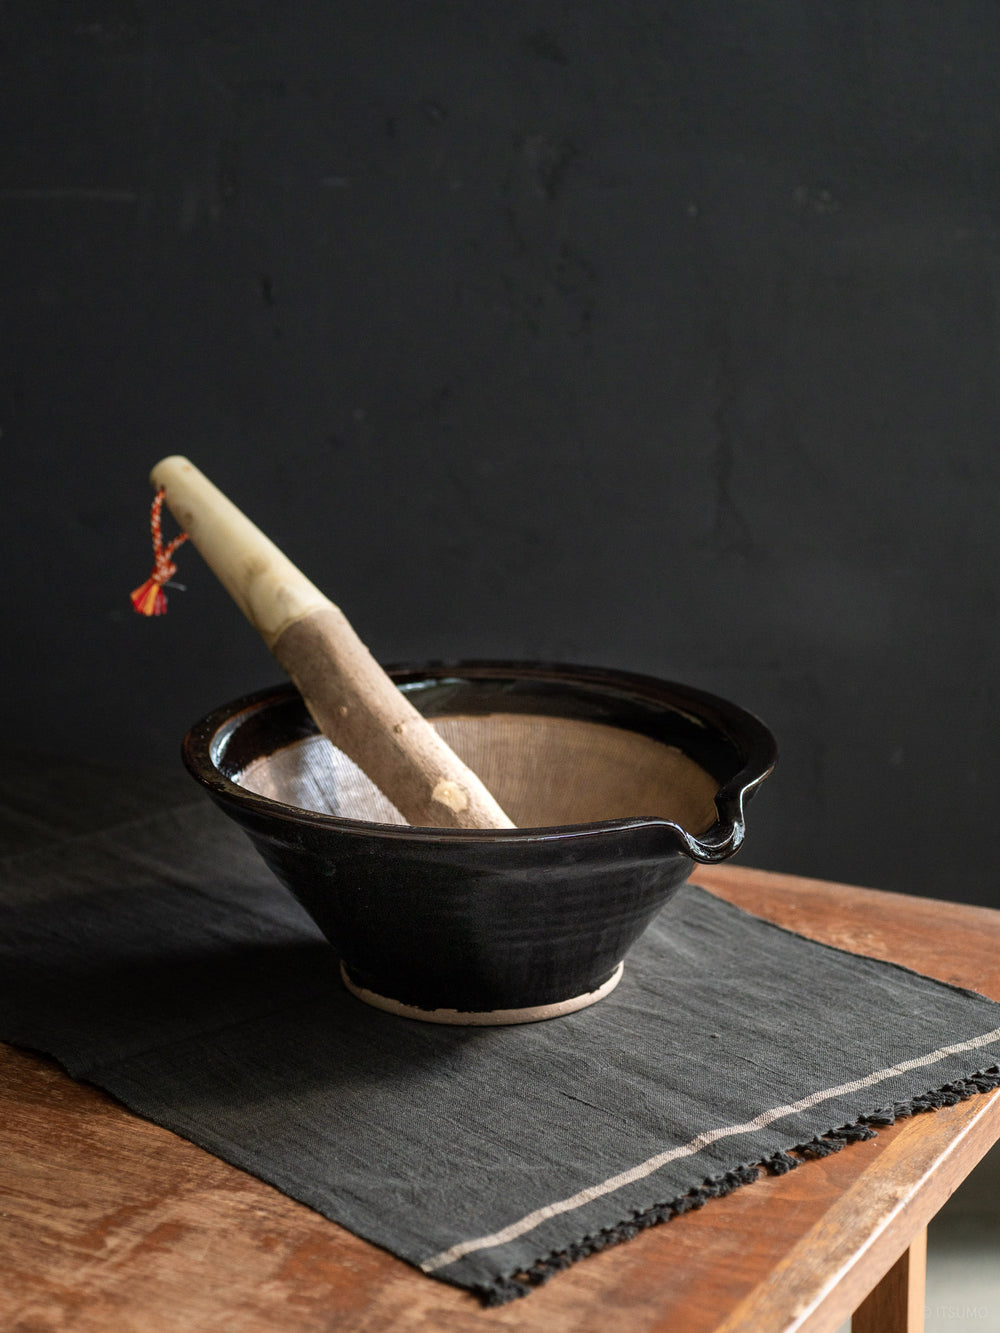 Azmaya's iga suribachi mortar in black glaze, with a wooden pestle leaning inside the bowl